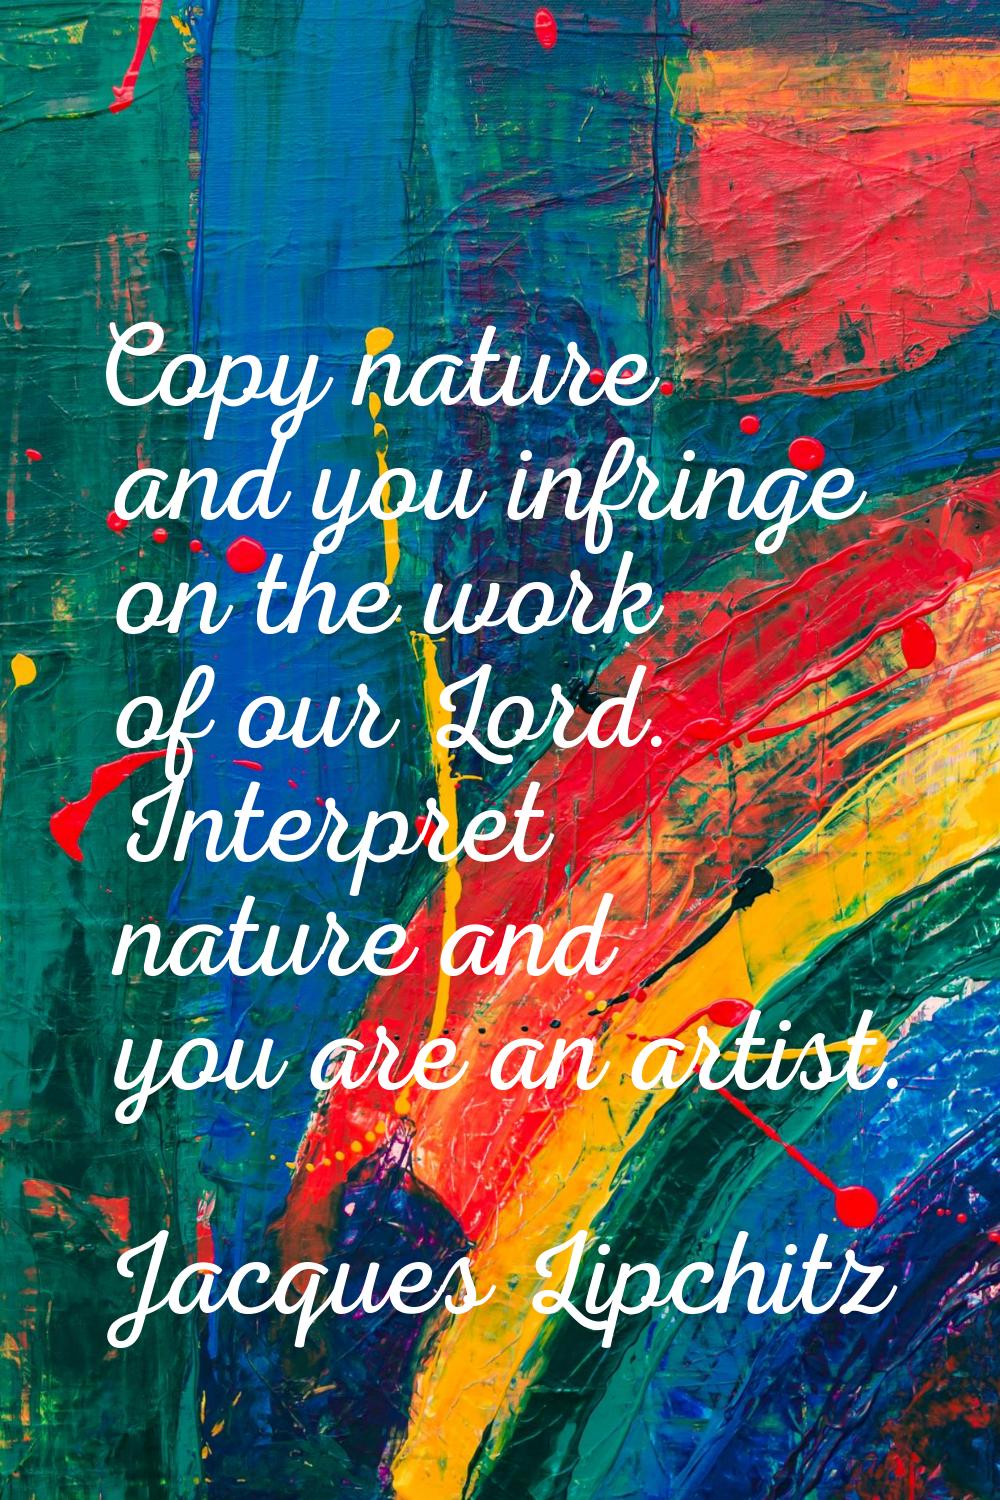 Copy nature and you infringe on the work of our Lord. Interpret nature and you are an artist.